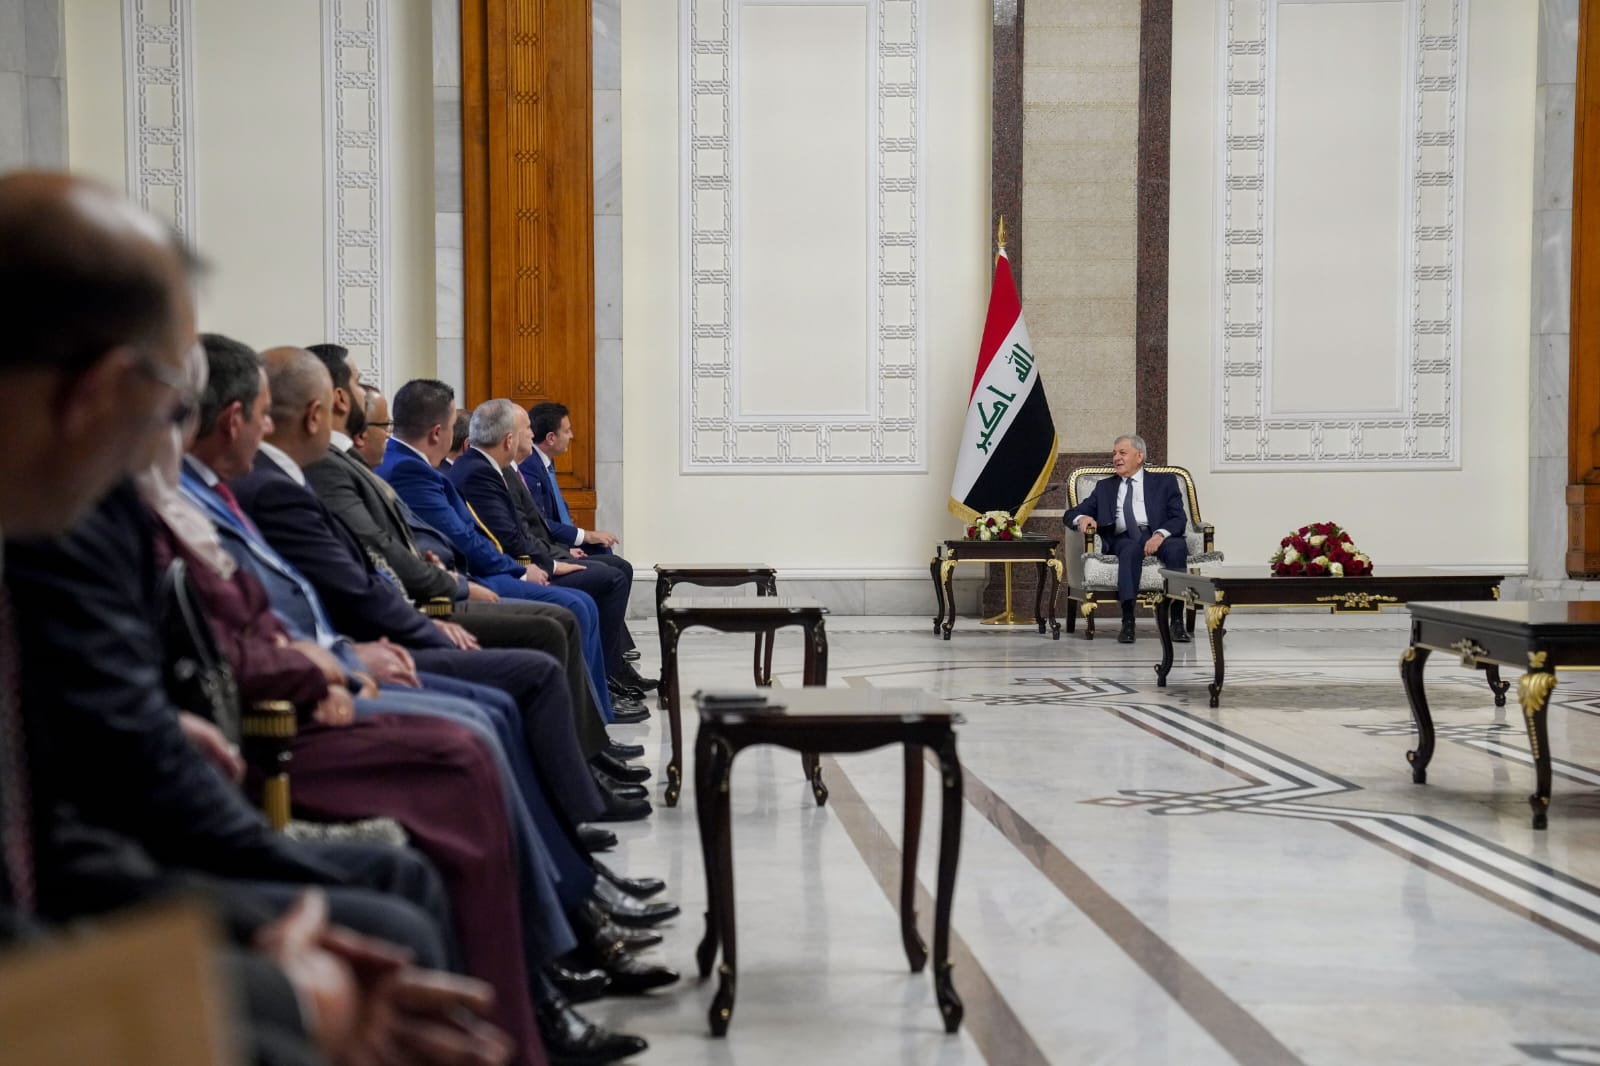 President Abdullatif: relations with Jordan are solid and deep-rooted